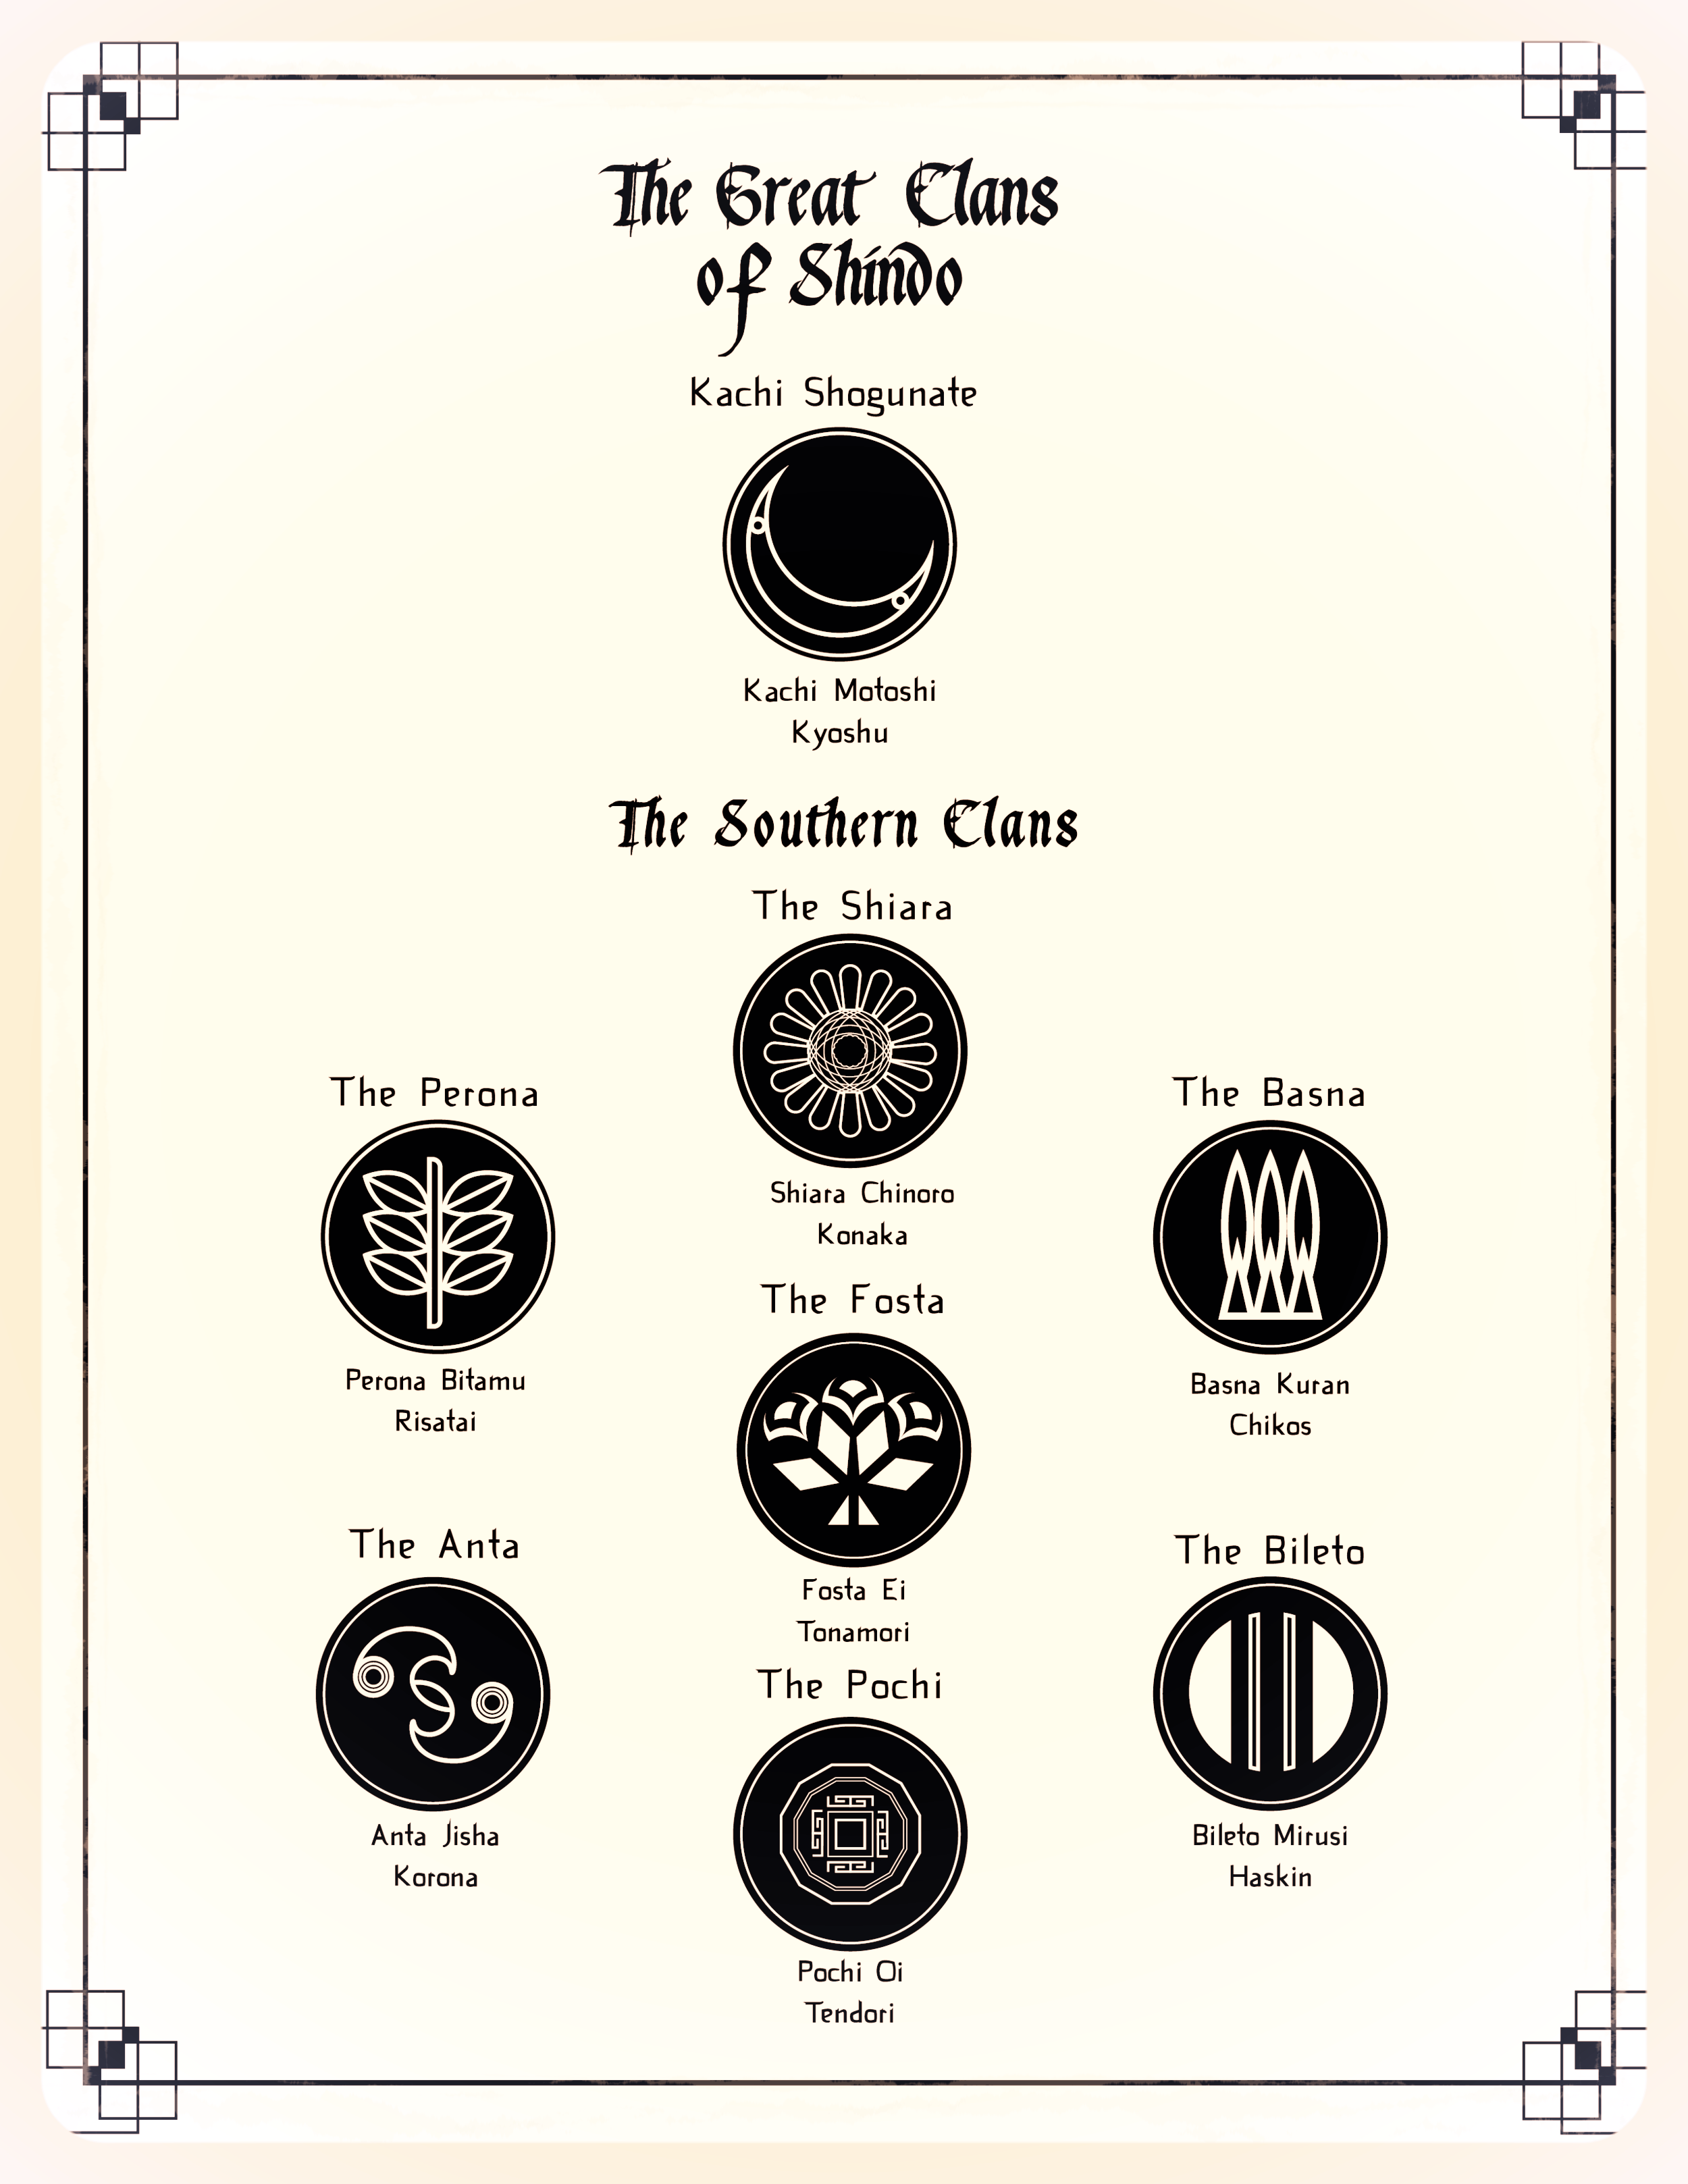 See the great clans of Shindo!